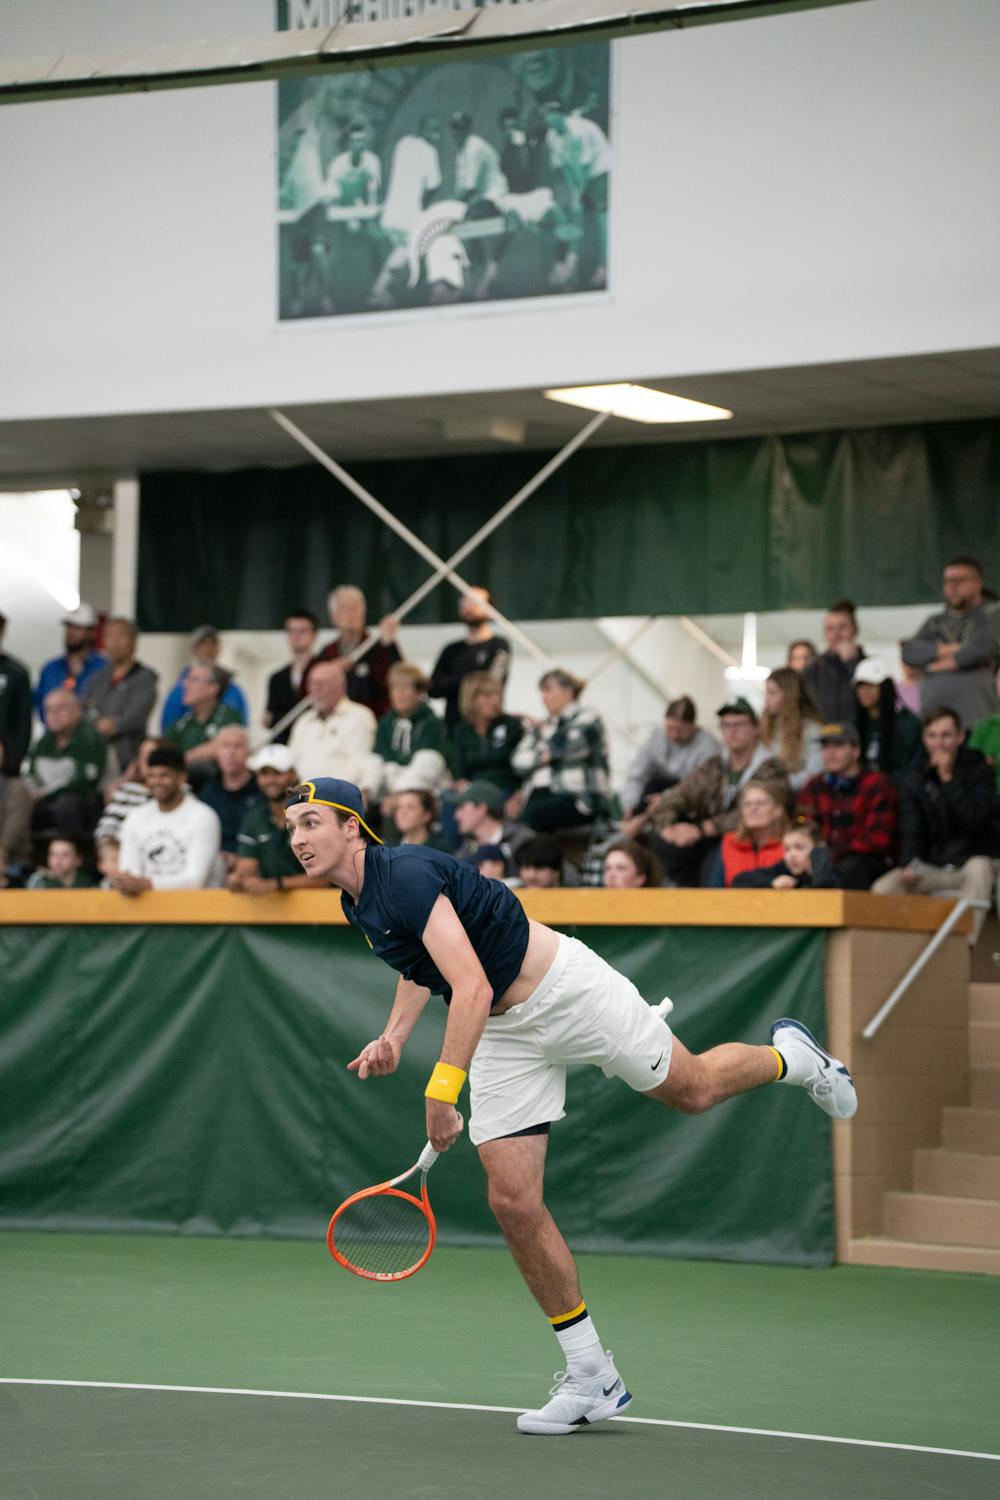 <p>Michigan junior Nino Ehrenschneider returns the ball during his doubles match with fifth-year Patrick Maloney against Michigan State at the MSU Tennis Center on March 30, 2023. The Spartans lost to the Wolverines 6-1.</p>